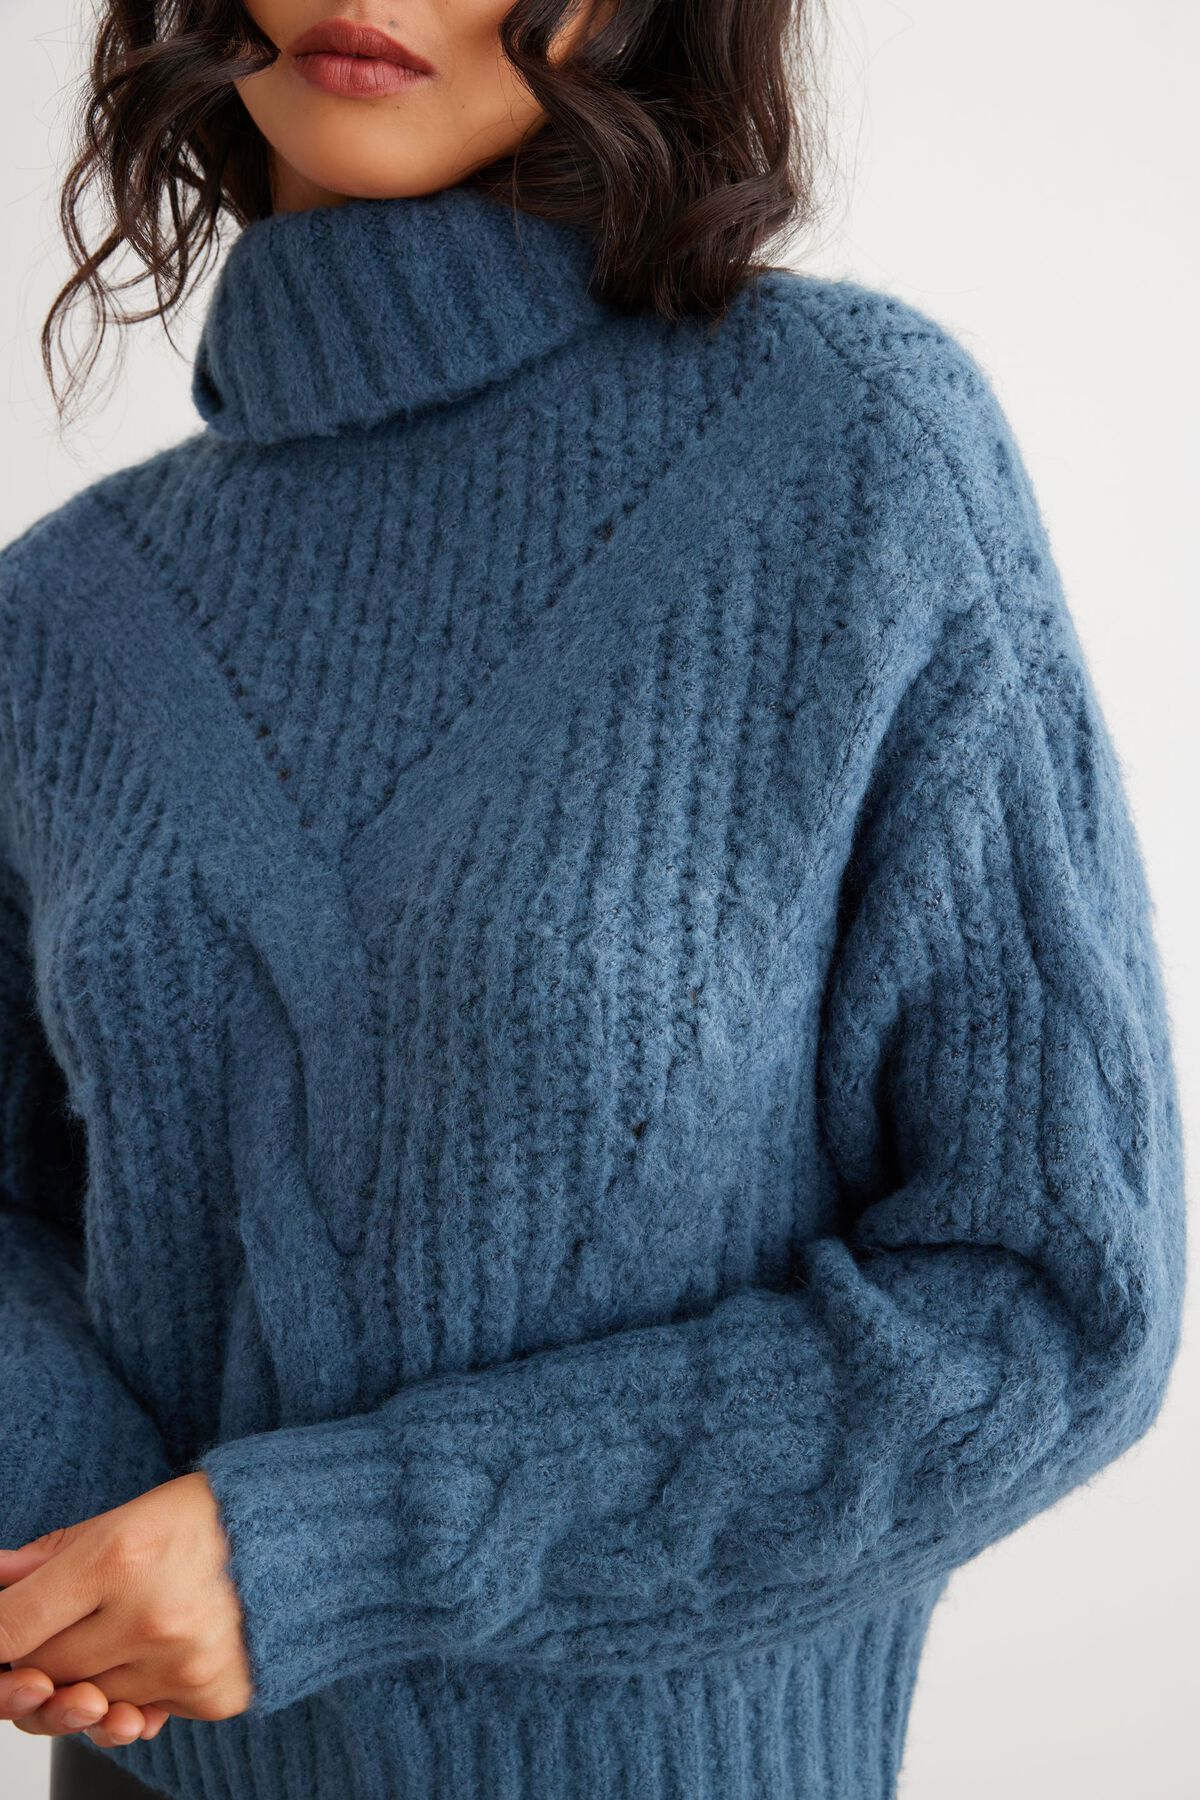 Dynamite Cable Knit Turtleneck Sweater. 3